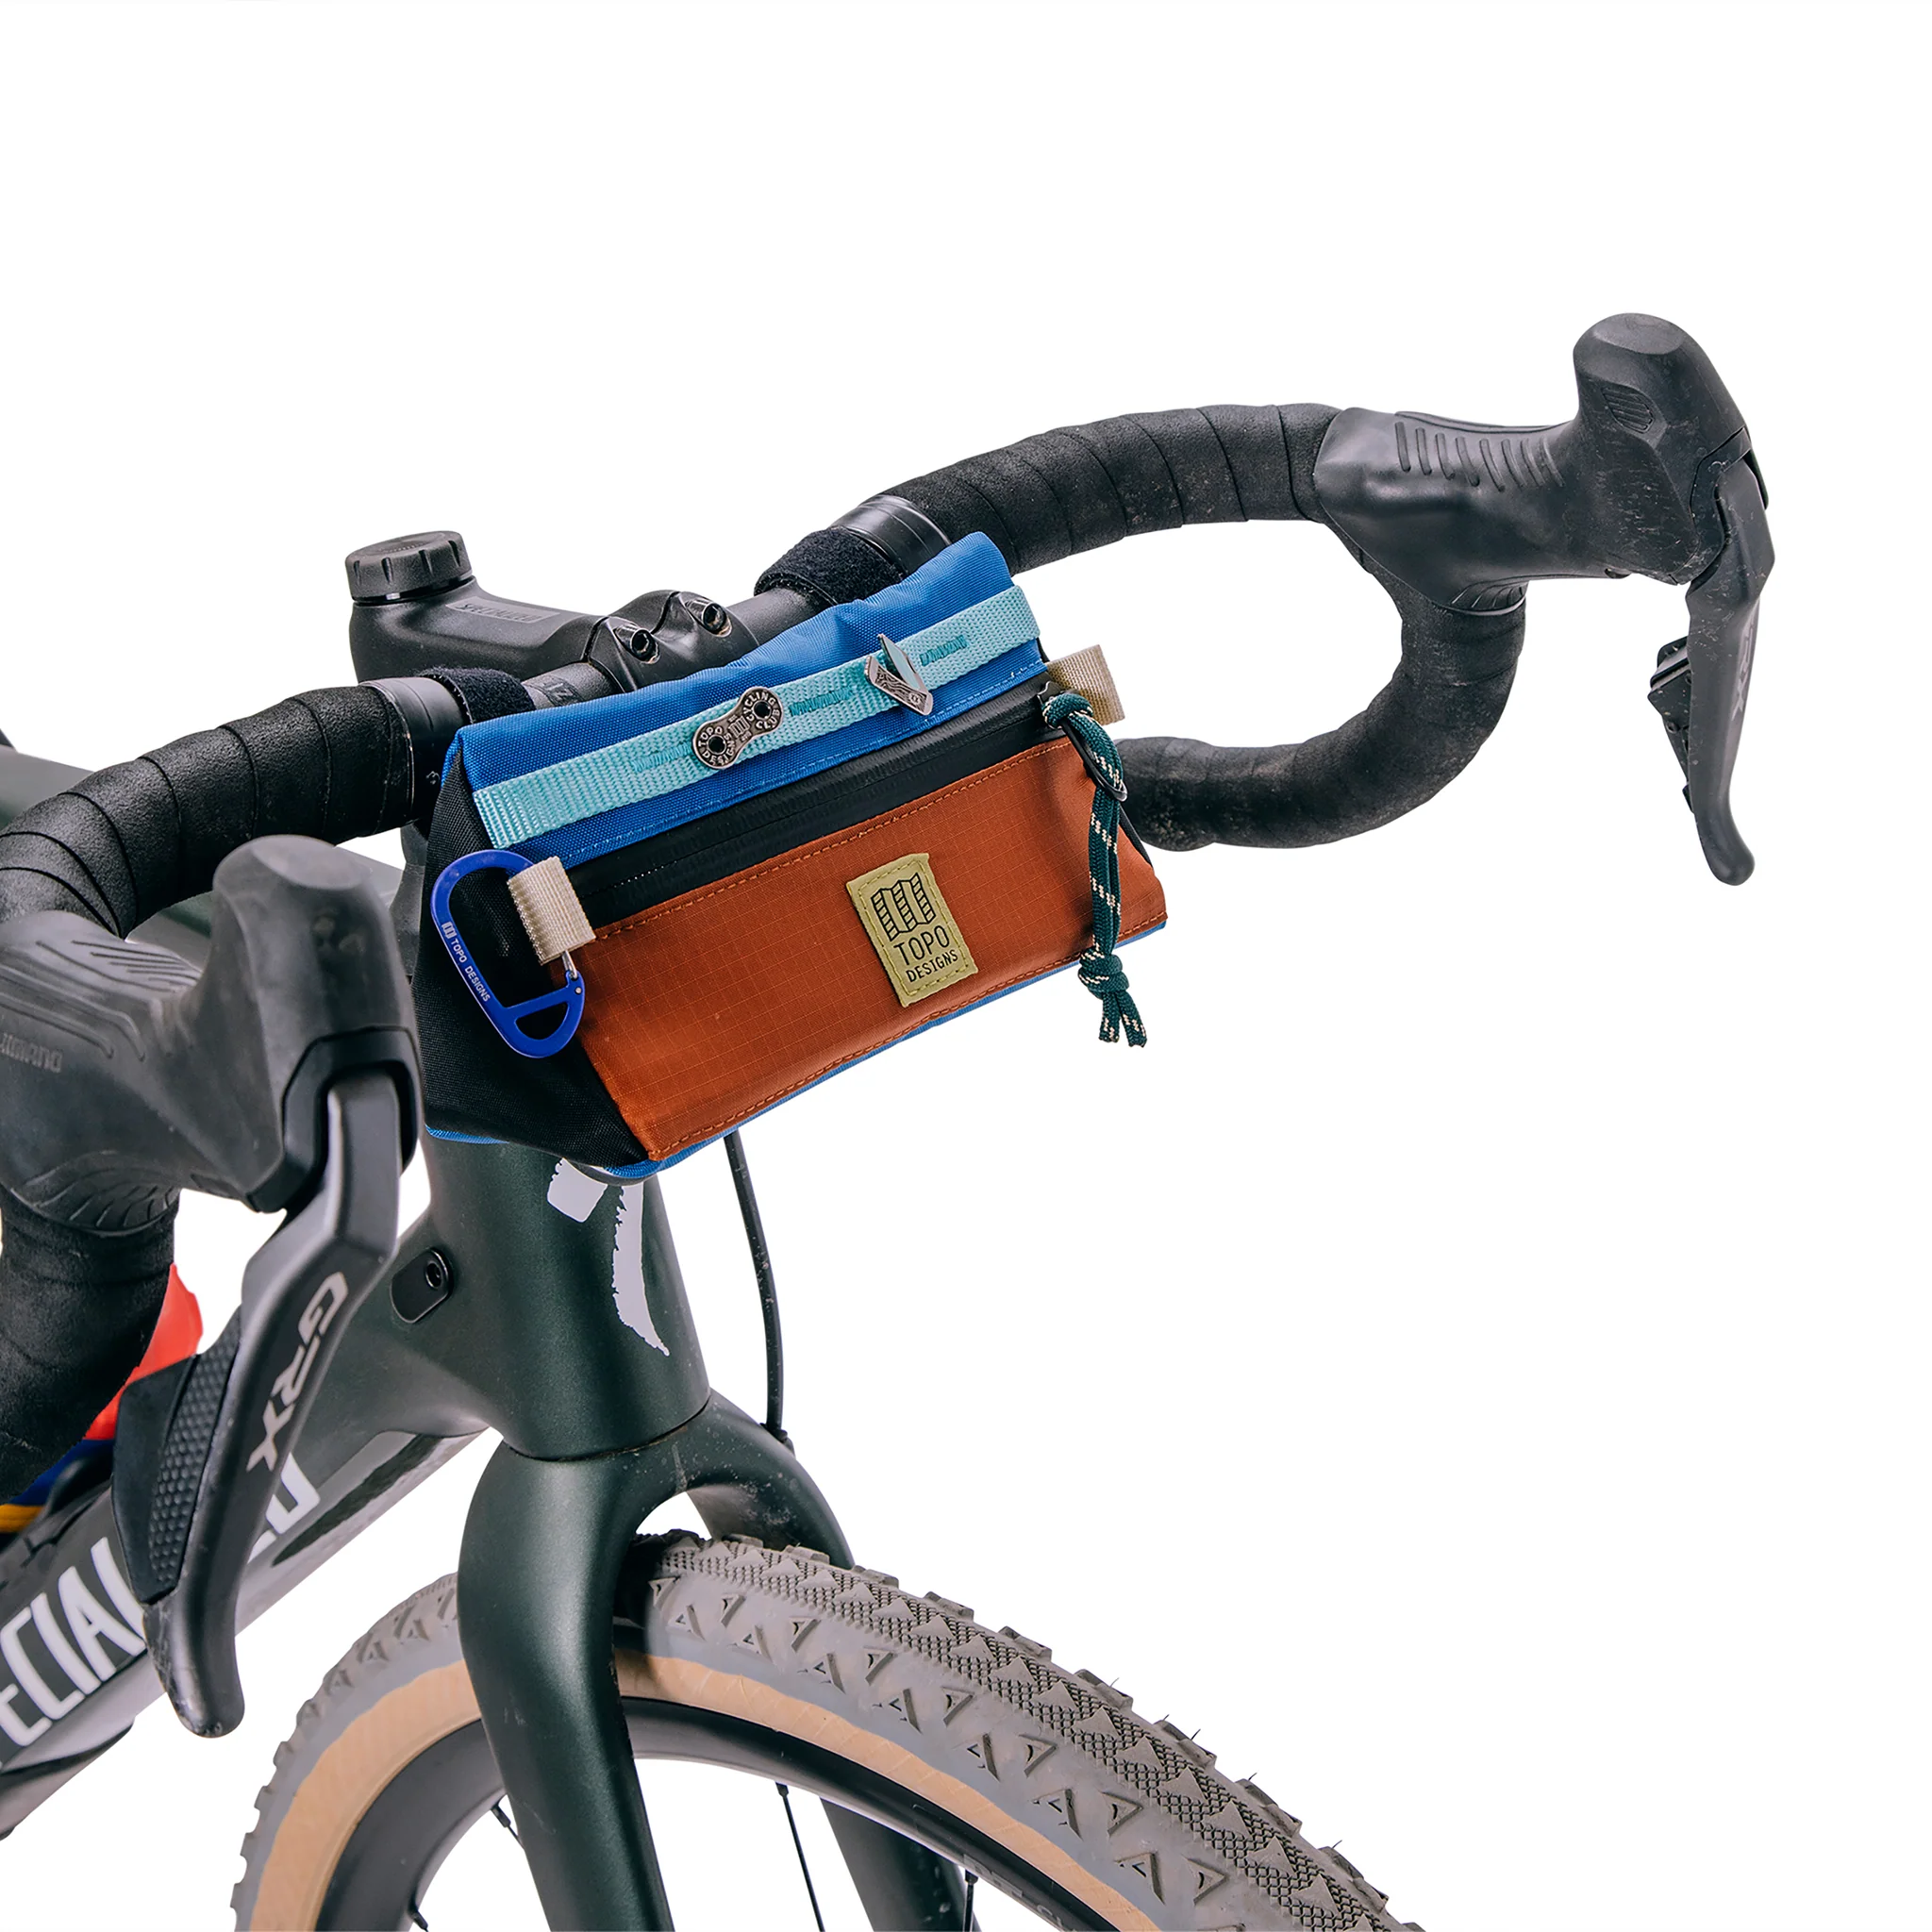 Boogie Roll Top Bag – Small Town Bike Co